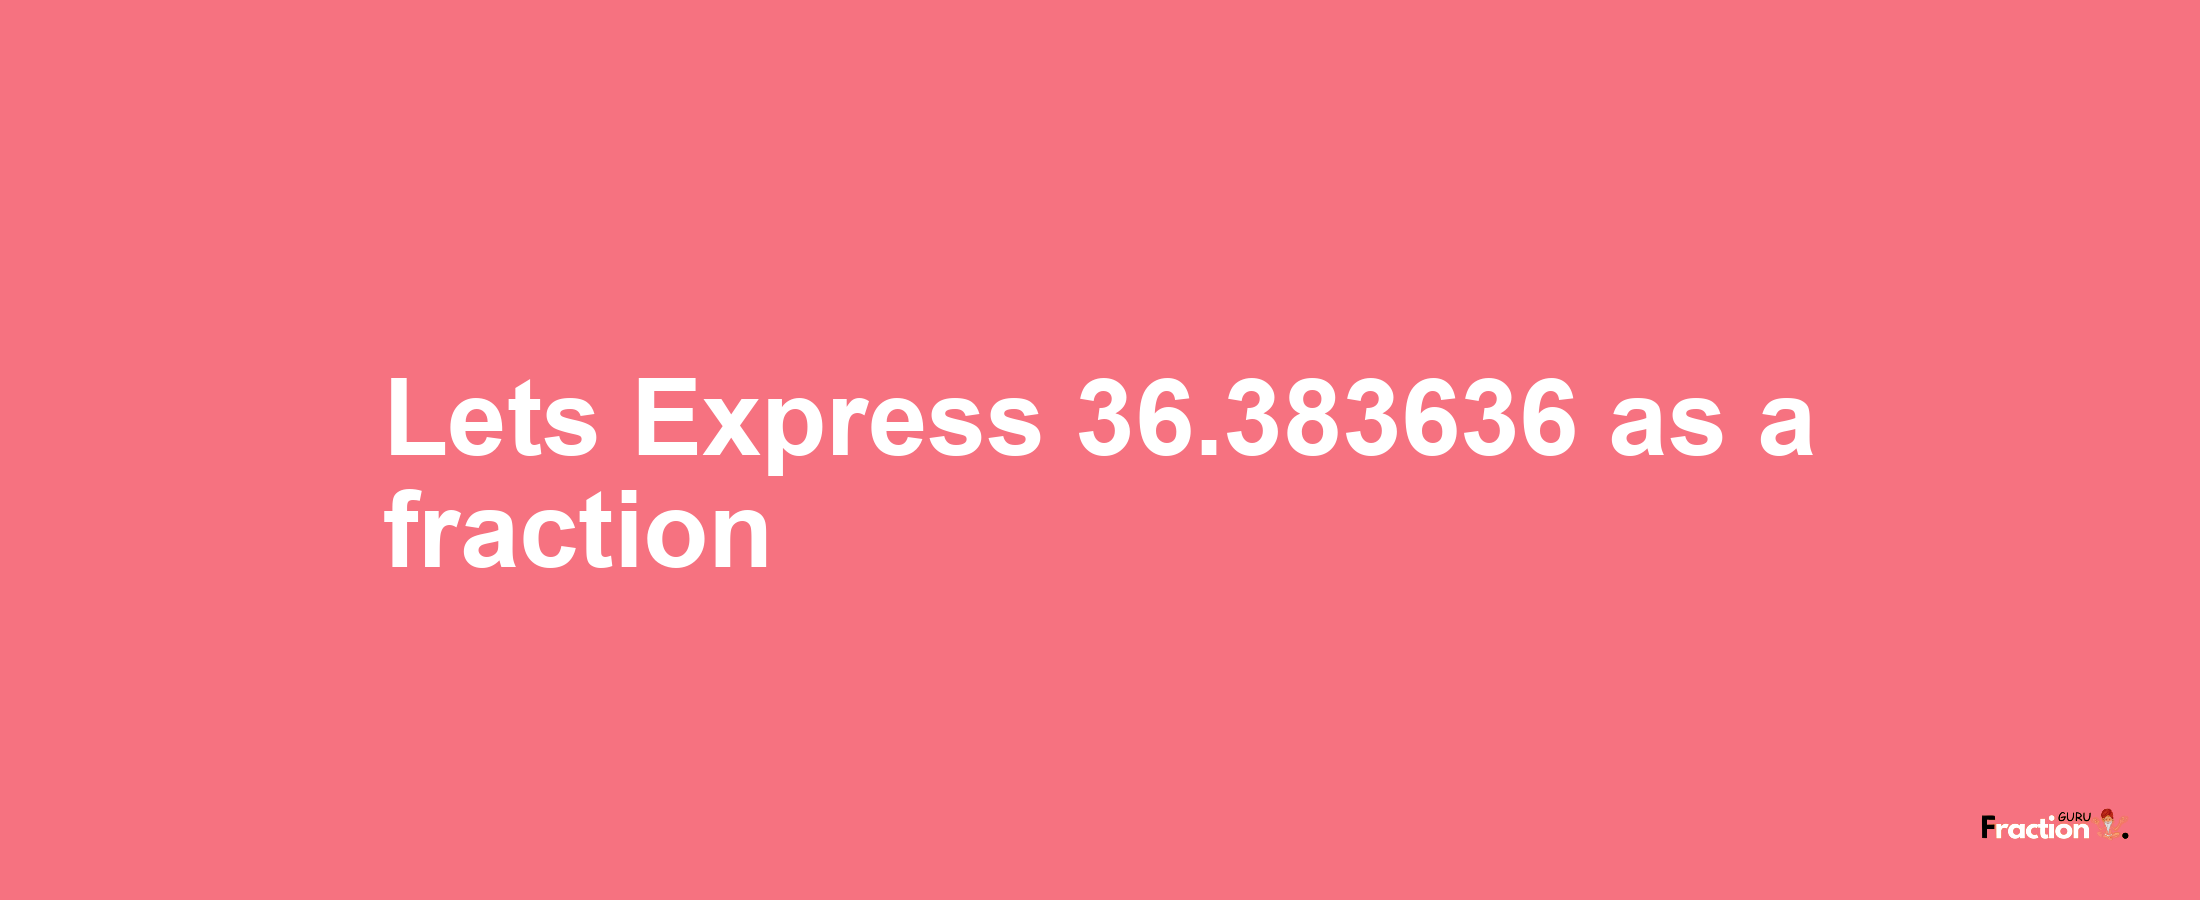 Lets Express 36.383636 as afraction